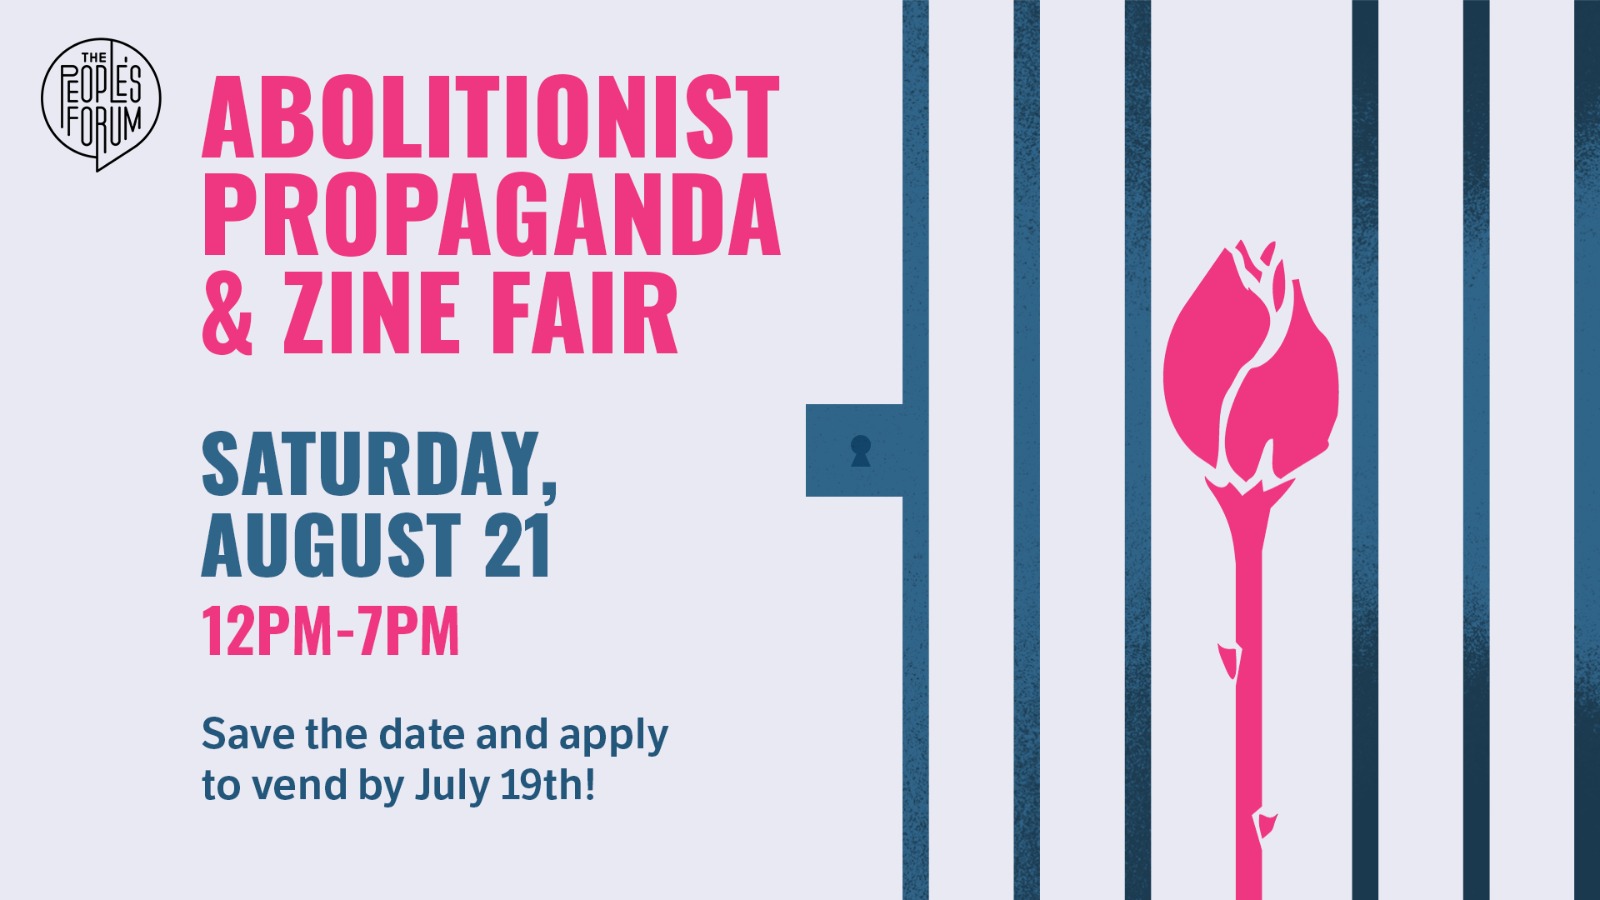 graphic with text, "Abolition Propaganda and Zine Fair, Saturday August 21, 12-7pm. Save the date and apply to vend by July 19." The People's Forum logo appears on the top left (stylized title in a circle). A graphic on the right depicts prison bars with a thorned rose between them.